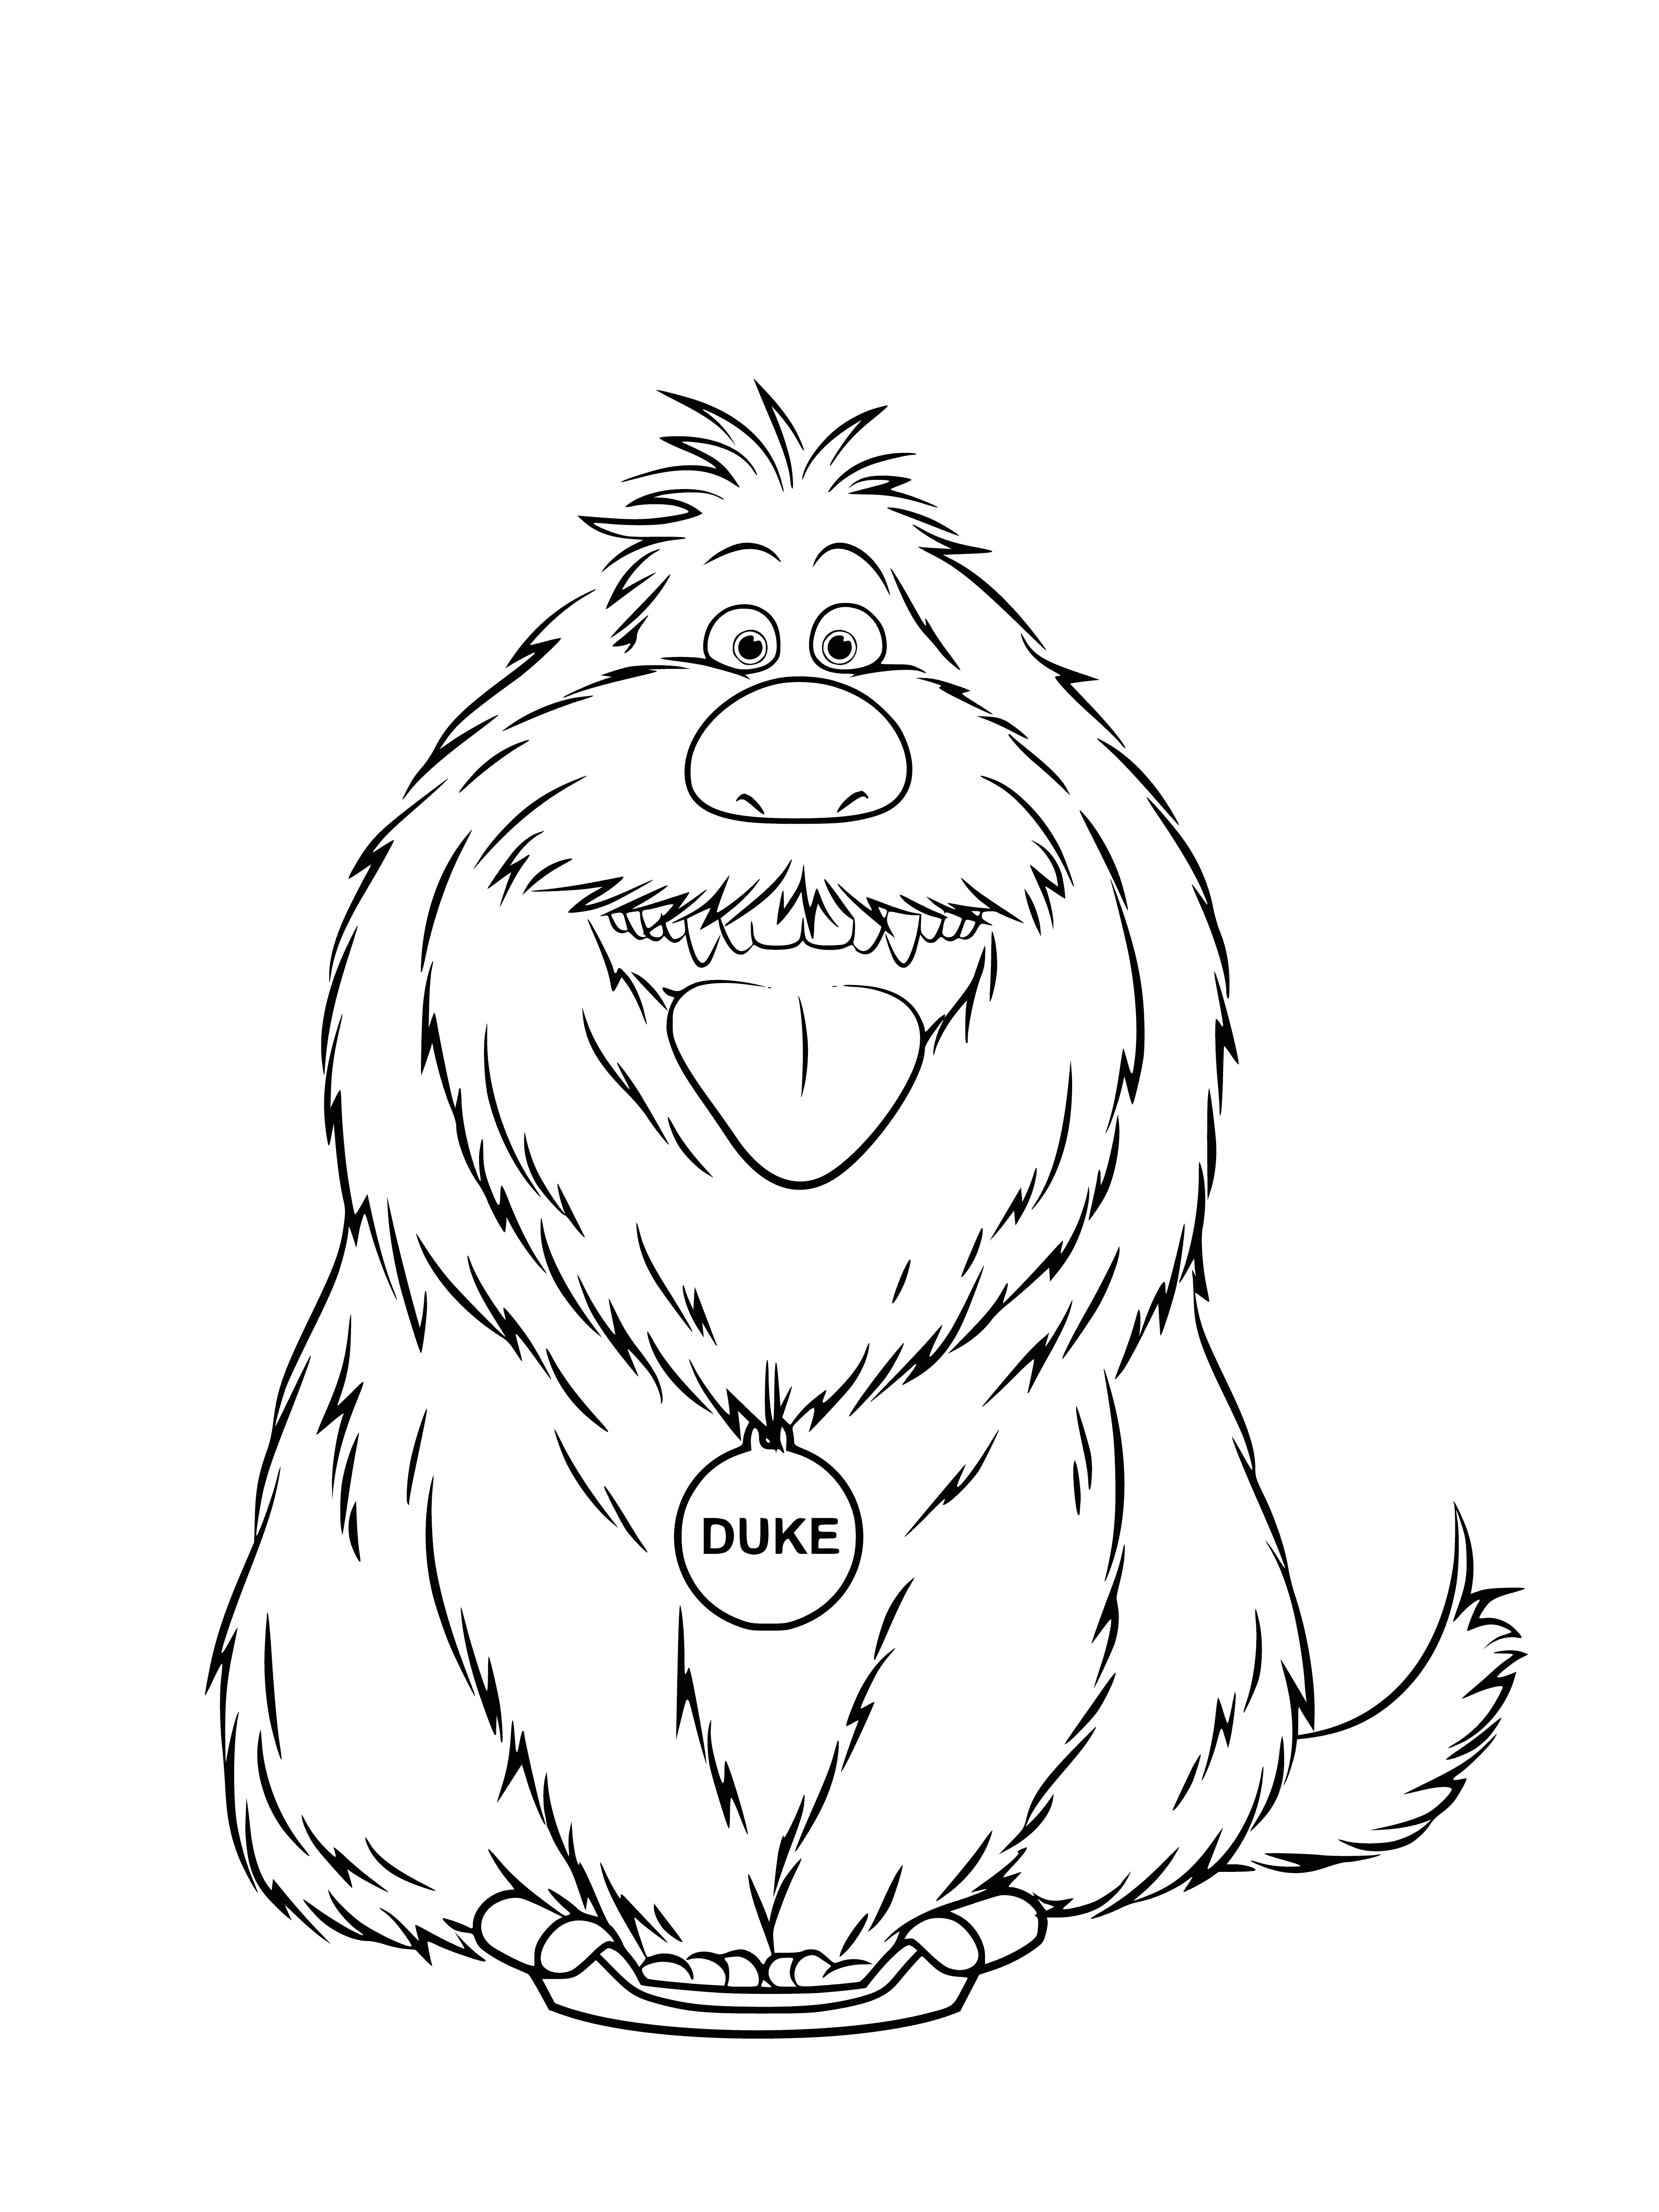 coloring page: Happy, friendly brown dog with black nose and floppy ears on a coloring page.